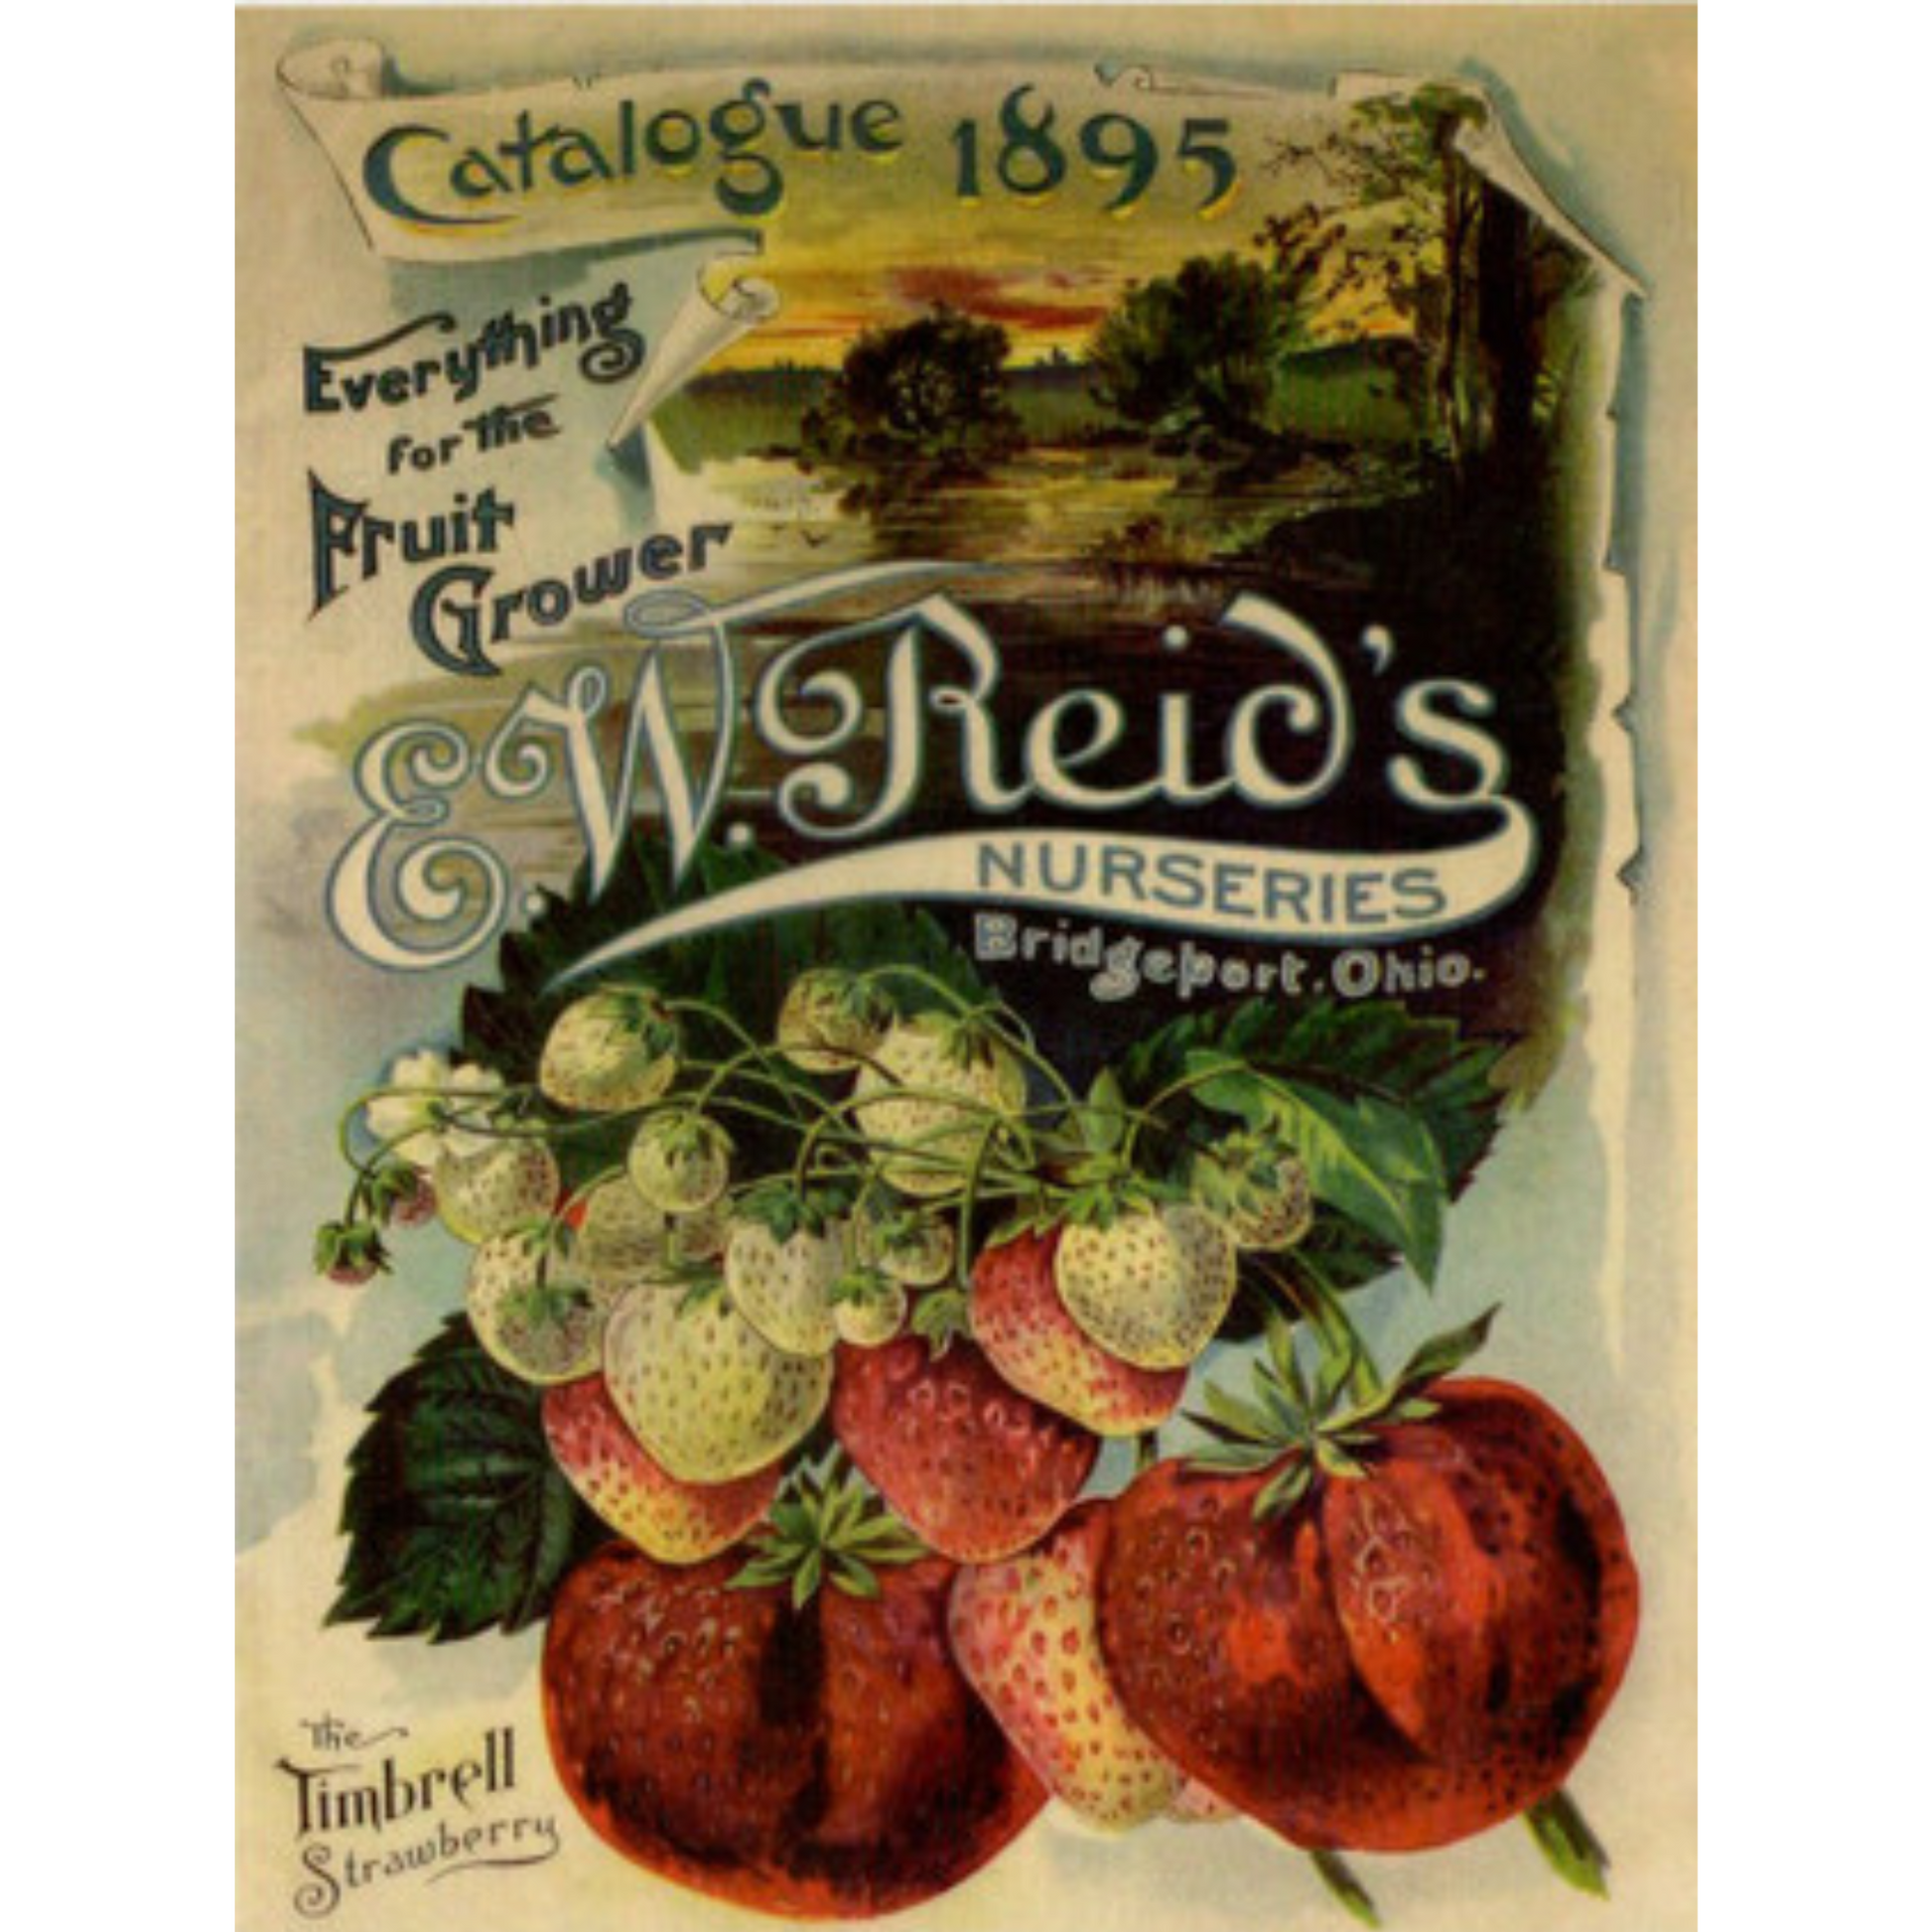 "EW Reid's Nurseries-The Timbrell Strawberry 1895" decoupage rice paper by Calambour. Size A4 available at Milton's Daughter.